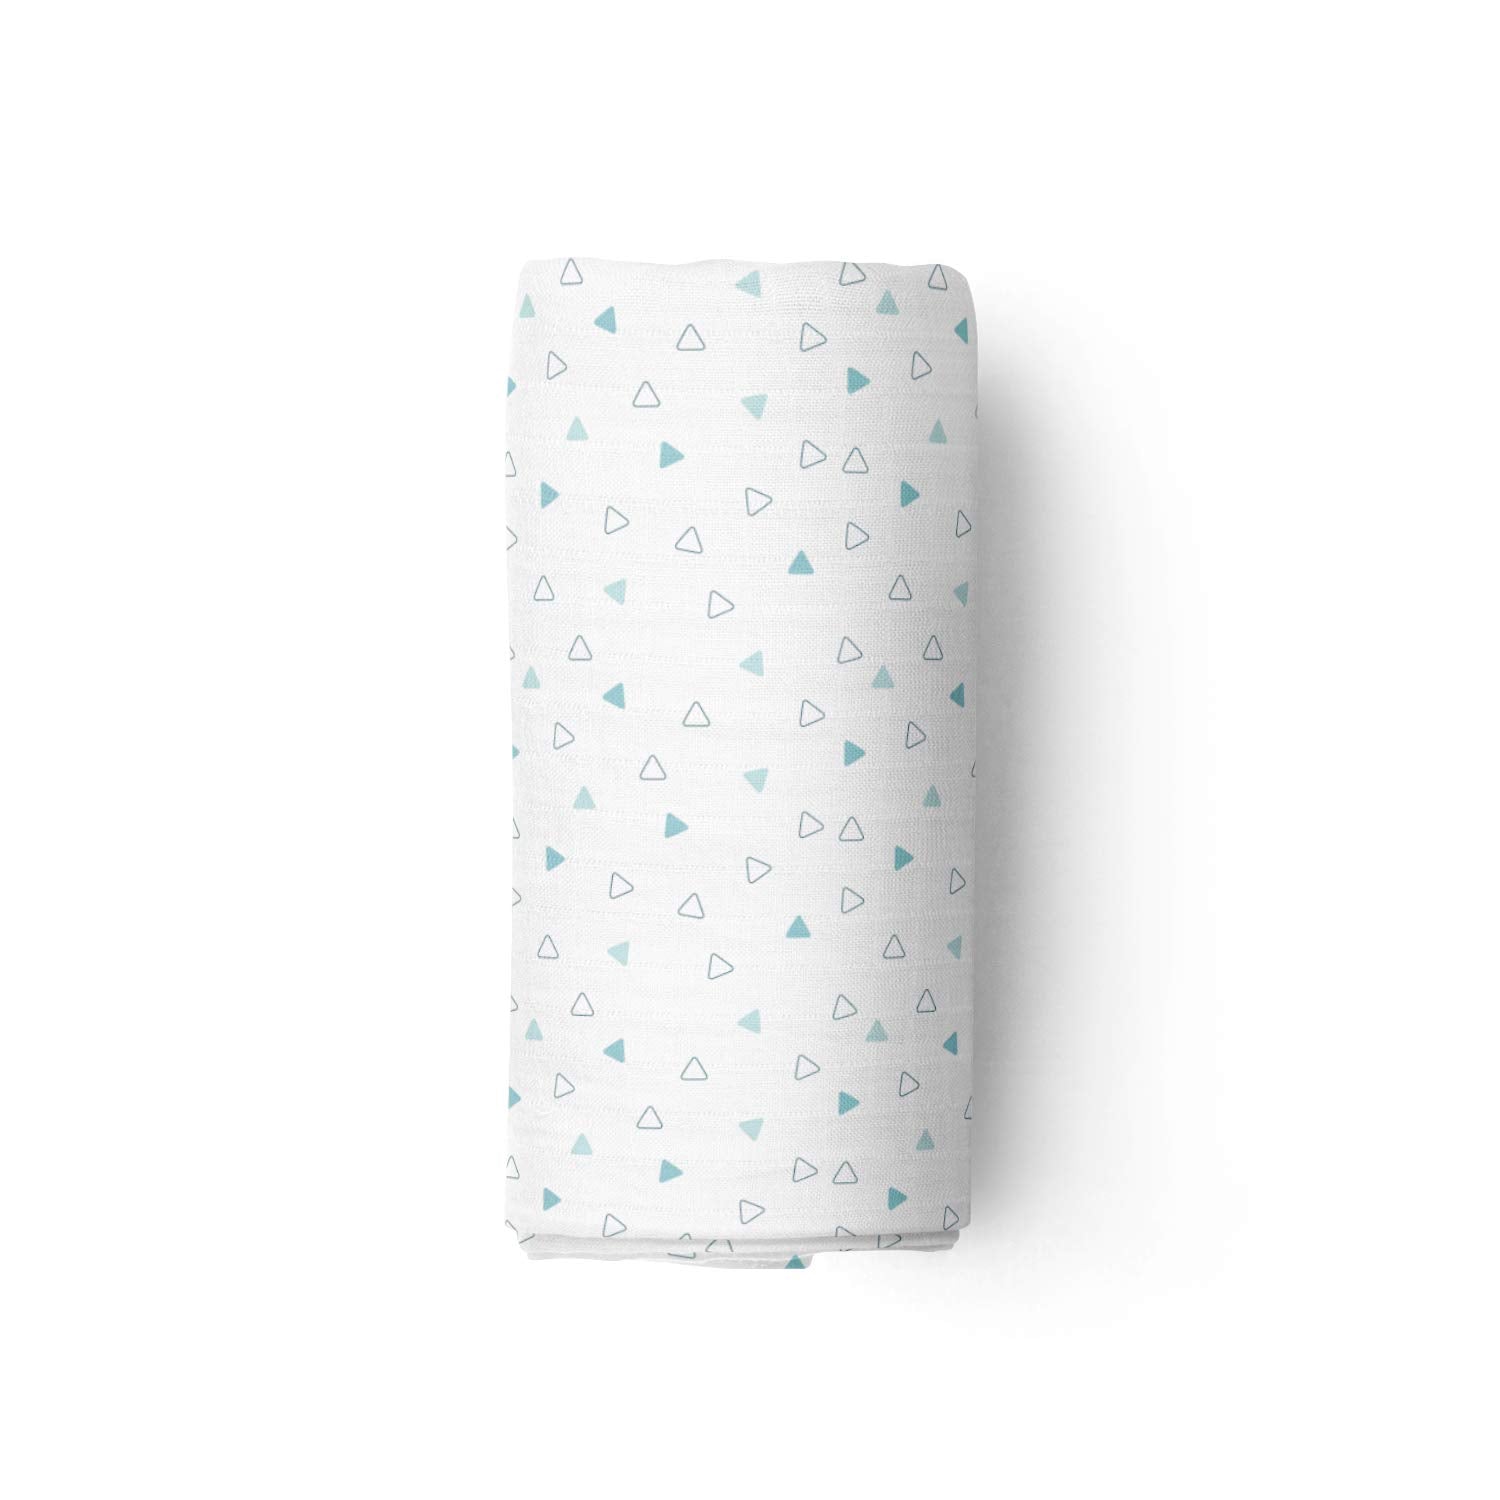 The White Cradle 100% Organic Cotton Baby Swaddle Wrap - Blue Triangle